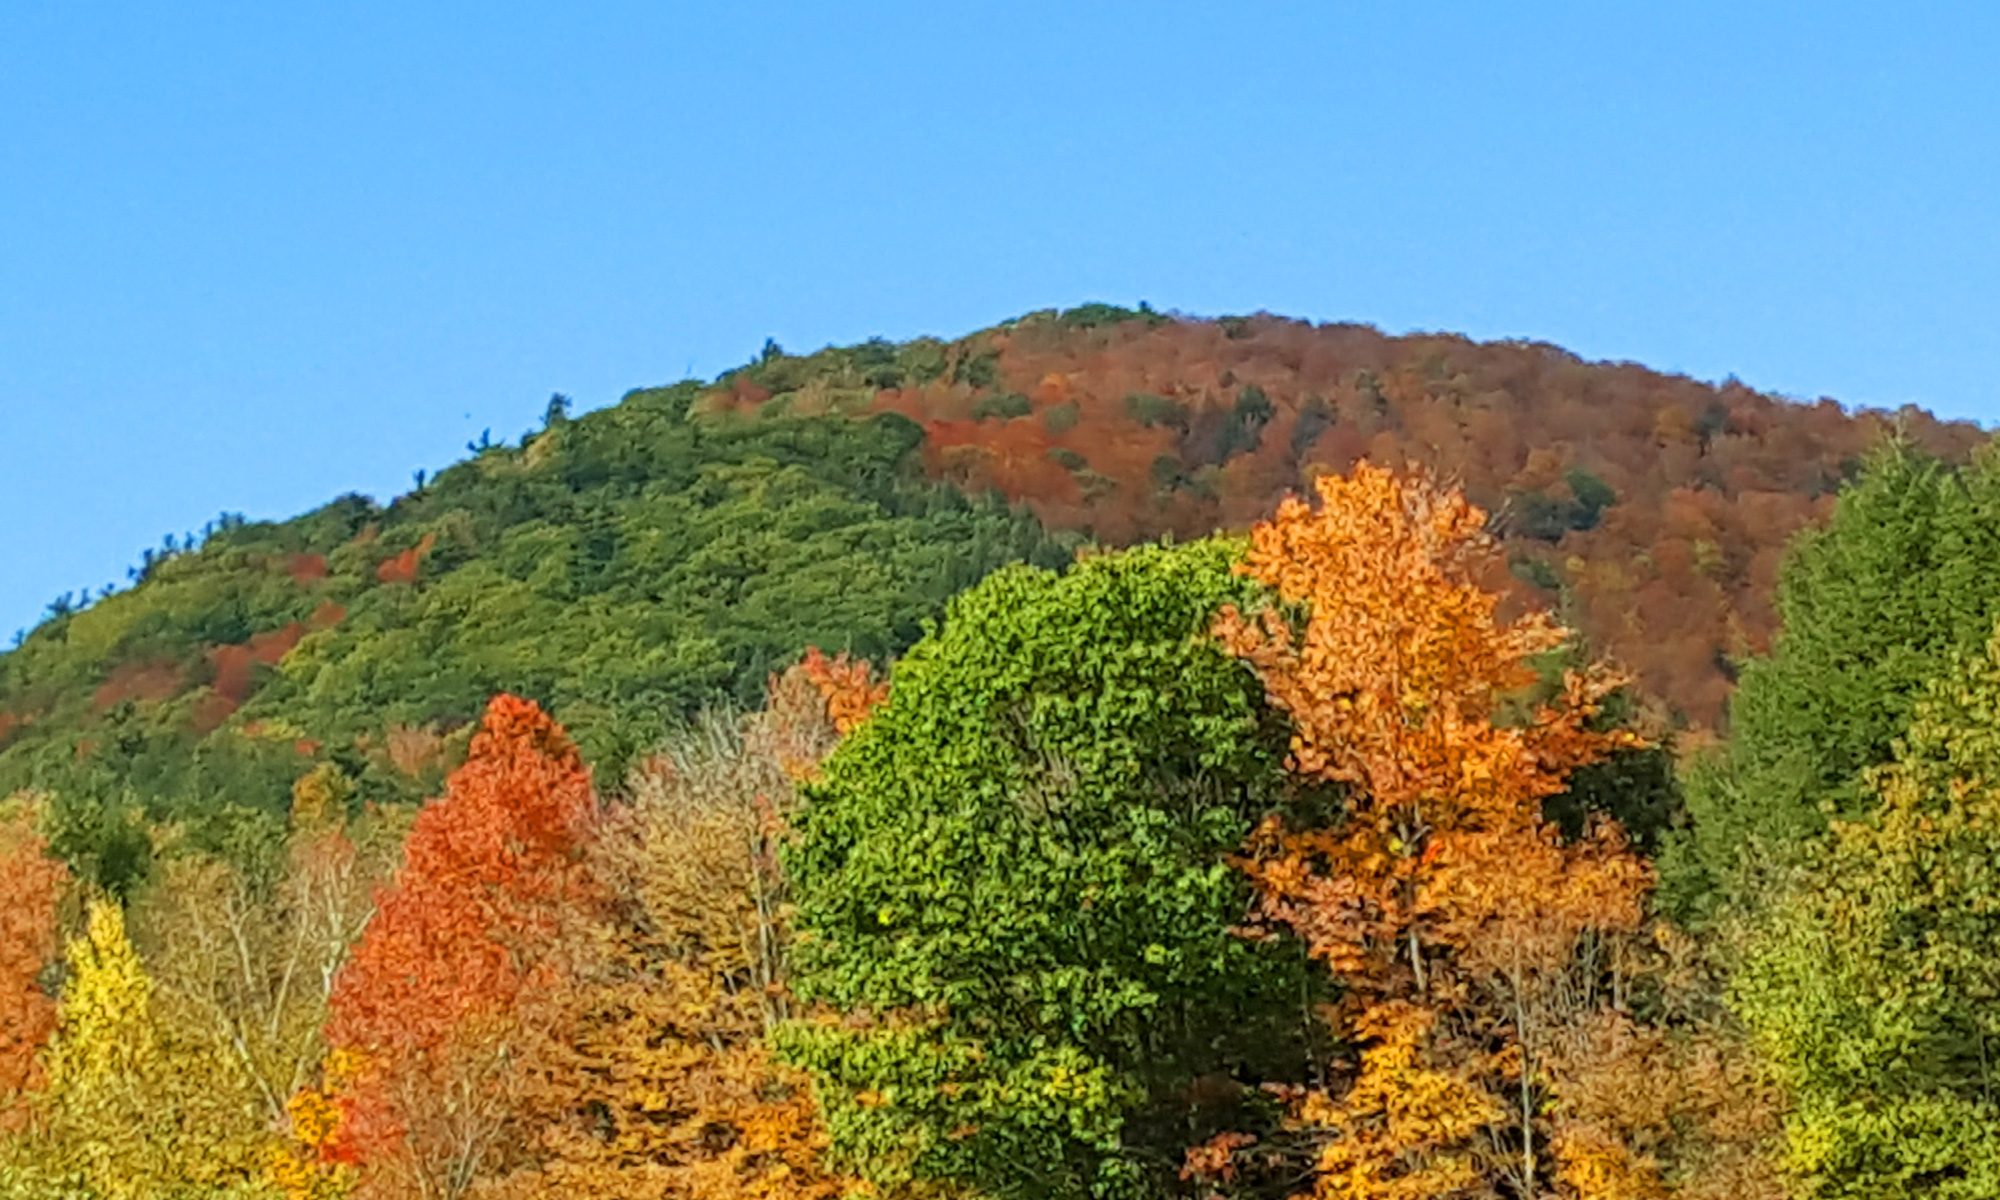 hill in fall colors with more trees in foreground